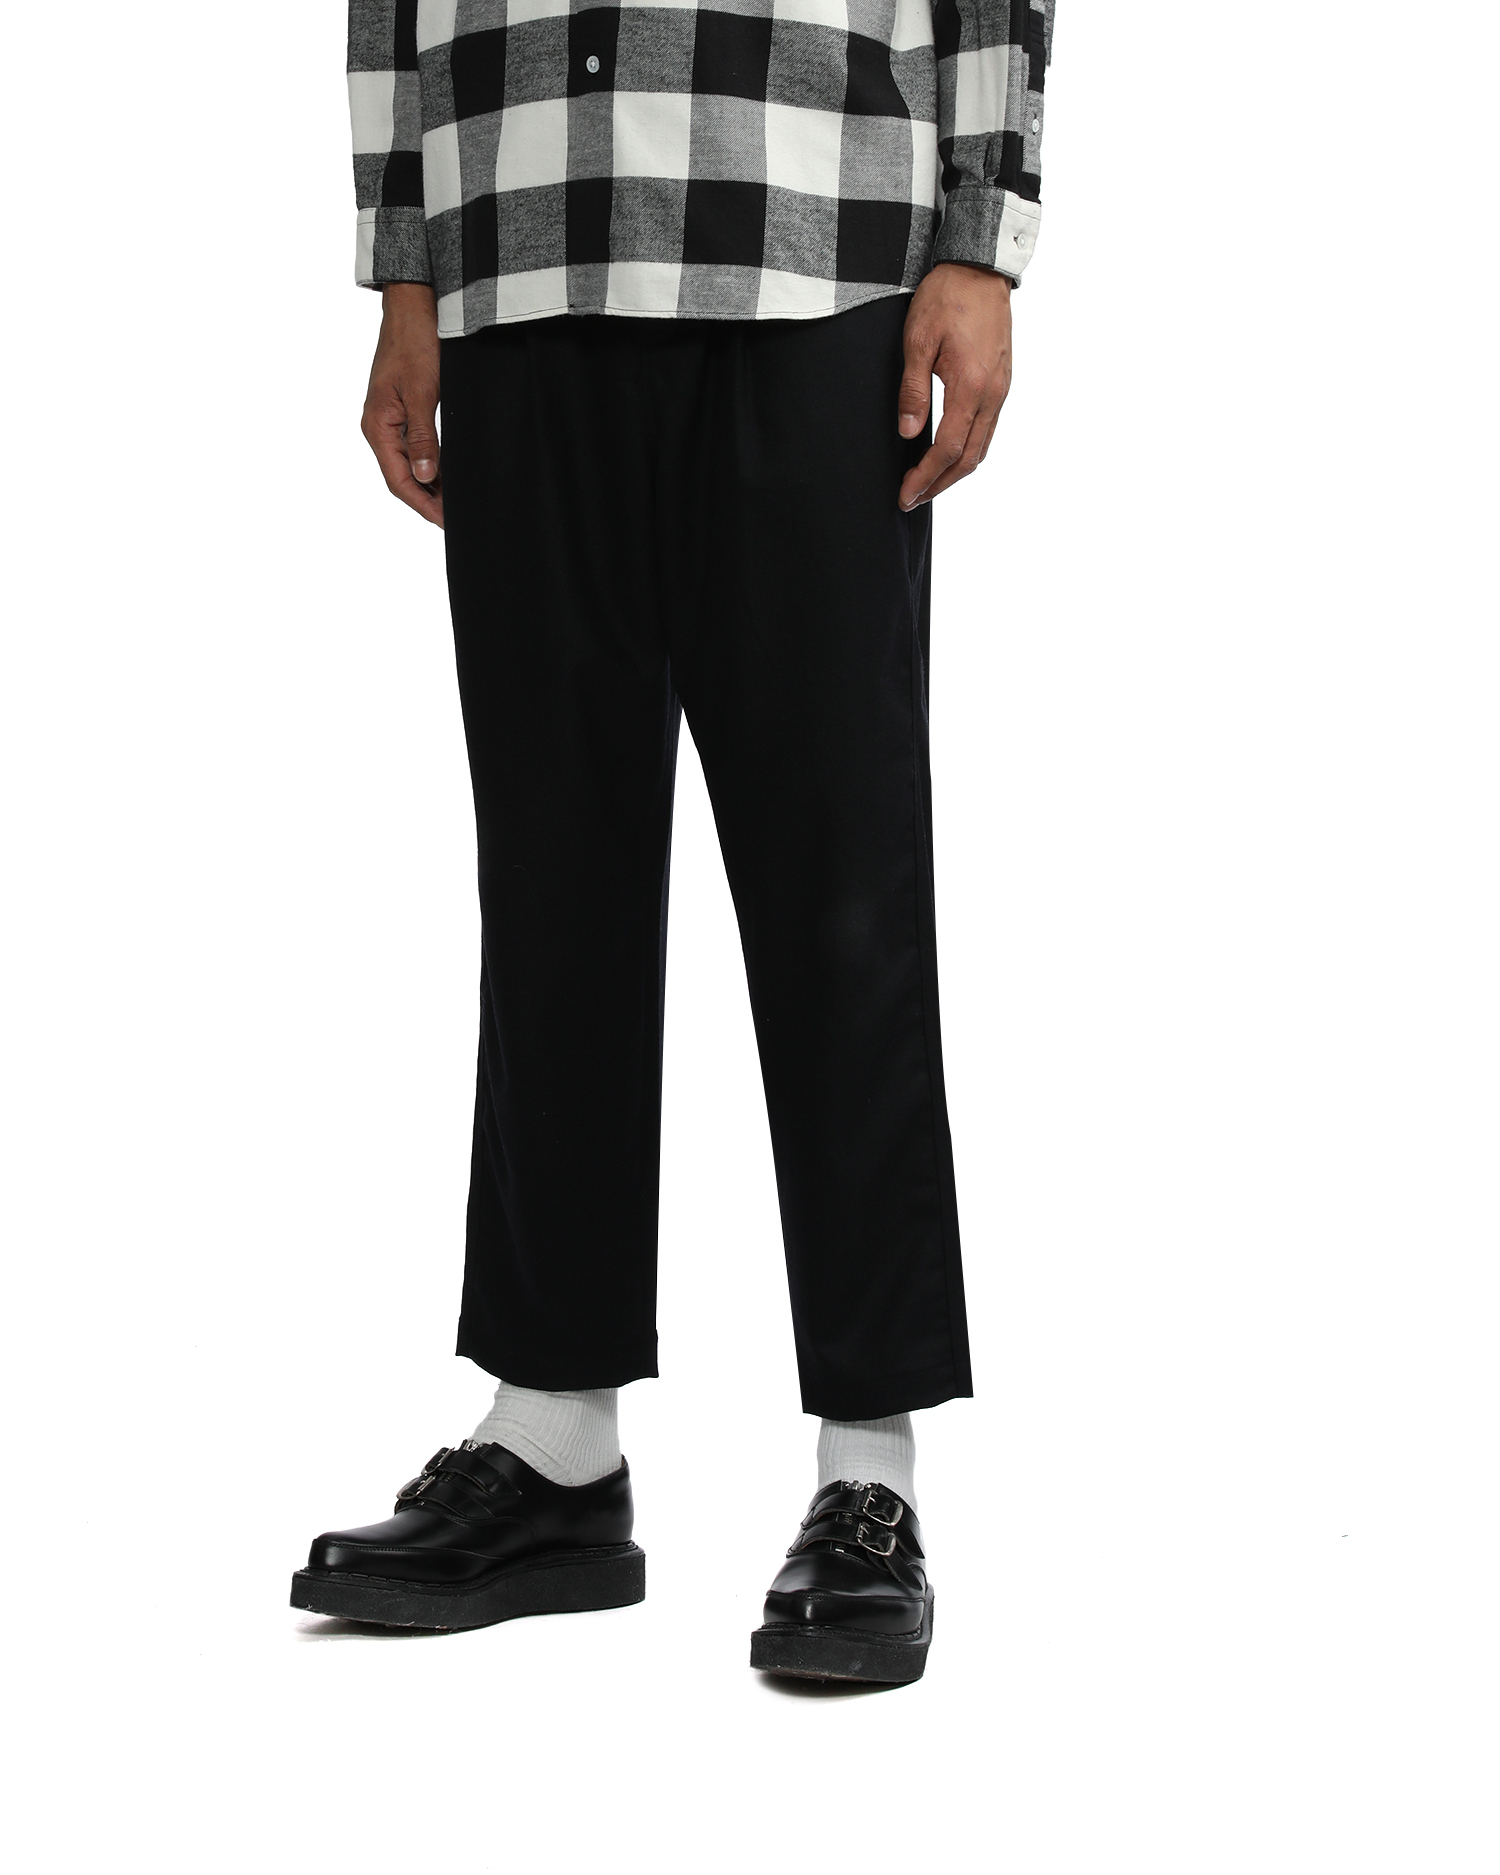 SOPHNET. Homespun wide belted baggy tuck tapered pants| ITeSHOP